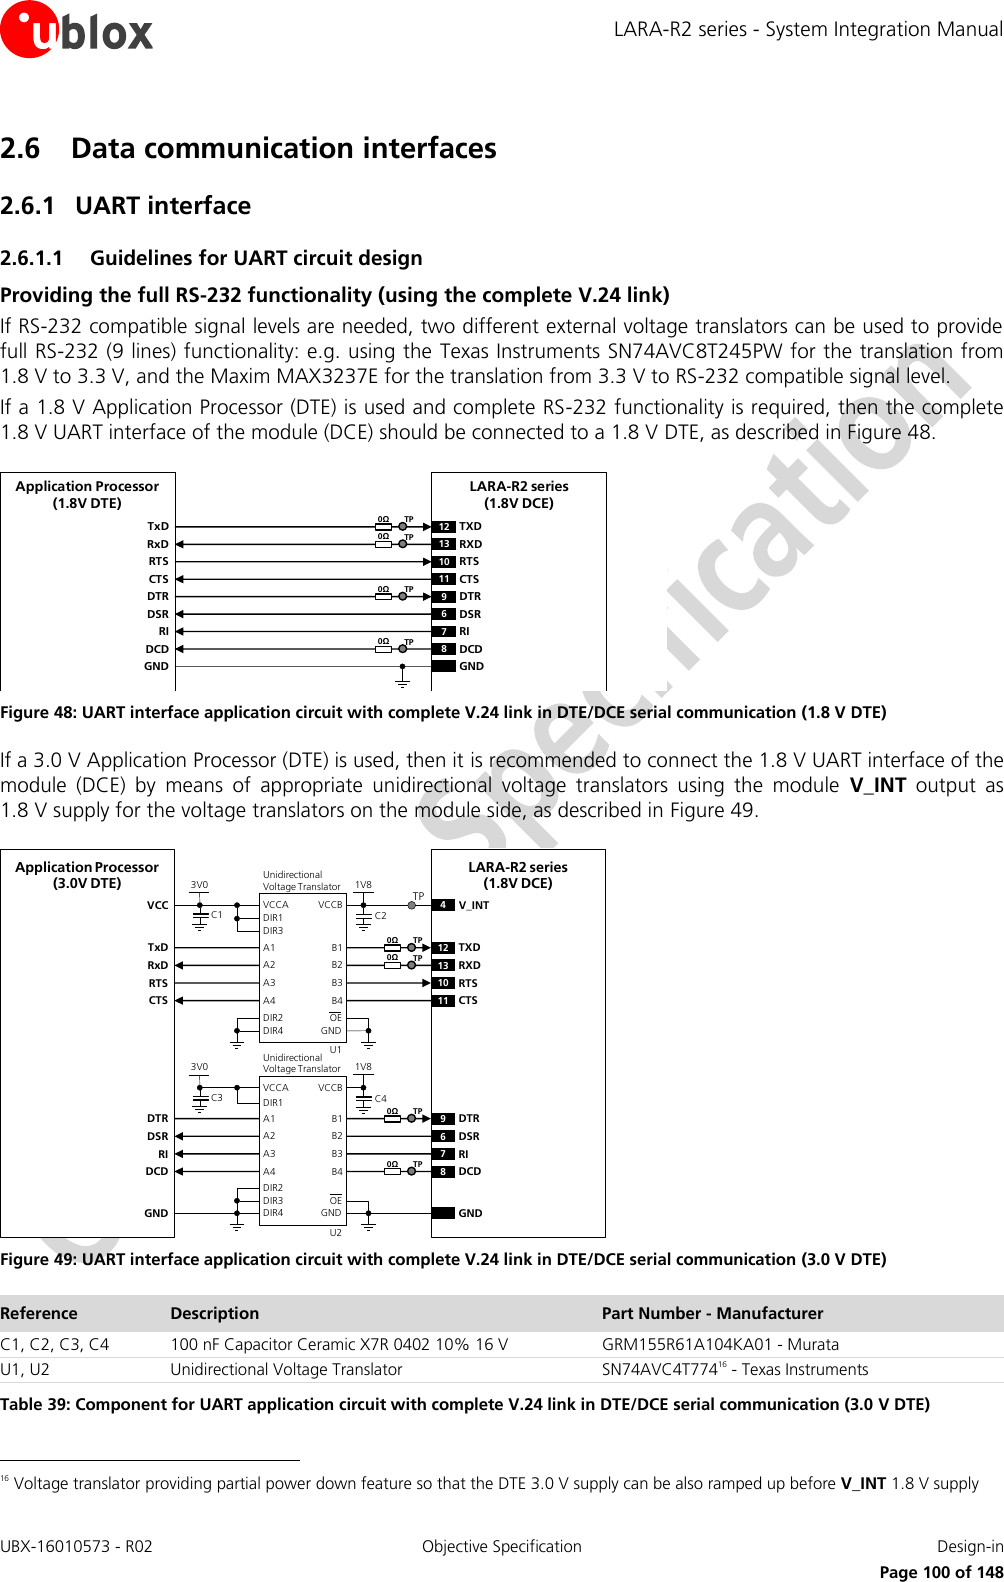 LARA-R2 series - System Integration Manual UBX-16010573 - R02  Objective Specification  Design-in     Page 100 of 148 2.6 Data communication interfaces 2.6.1 UART interface  2.6.1.1 Guidelines for UART circuit design Providing the full RS-232 functionality (using the complete V.24 link) If RS-232 compatible signal levels are needed, two different external voltage translators can be used to provide full RS-232 (9 lines) functionality: e.g. using the  Texas Instruments SN74AVC8T245PW for the translation from 1.8 V to 3.3 V, and the Maxim MAX3237E for the translation from 3.3 V to RS-232 compatible signal level. If a 1.8 V Application Processor (DTE) is used and complete RS-232 functionality is required, then the complete 1.8 V UART interface of the module (DCE) should be connected to a 1.8 V DTE, as described in Figure 48. TxDApplication Processor(1.8V DTE)RxDRTSCTSDTRDSRRIDCDGNDLARA-R2 series(1.8V DCE)12 TXD9DTR13 RXD10 RTS11 CTS6DSR7RI8DCDGND0ΩTP0ΩTP0ΩTP0ΩTP Figure 48: UART interface application circuit with complete V.24 link in DTE/DCE serial communication (1.8 V DTE) If a 3.0 V Application Processor (DTE) is used, then it is recommended to connect the 1.8 V UART interface of the module  (DCE)  by  means  of  appropriate  unidirectional  voltage  translators  using  the  module  V_INT output  as 1.8 V supply for the voltage translators on the module side, as described in Figure 49. 4V_INTTxDApplication Processor(3.0V DTE)RxDRTSCTSDTRDSRRIDCDGNDLARA-R2 series(1.8V DCE)12 TXD9DTR13 RXD10 RTS11 CTS6DSR7RI8DCDGND1V8B1 A1GNDU1B3A3VCCBVCCAUnidirectionalVoltage TranslatorC1 C23V0DIR3DIR2 OEDIR1VCCB2 A2B4A4DIR41V8B1 A1GNDU2B3A3VCCBVCCAUnidirectionalVoltage TranslatorC3 C43V0DIR1DIR3 OEB2 A2B4A4DIR4DIR2TP0ΩTP0ΩTP0ΩTP0ΩTP Figure 49: UART interface application circuit with complete V.24 link in DTE/DCE serial communication (3.0 V DTE) Reference Description Part Number - Manufacturer C1, C2, C3, C4 100 nF Capacitor Ceramic X7R 0402 10% 16 V GRM155R61A104KA01 - Murata U1, U2 Unidirectional Voltage Translator SN74AVC4T77416 - Texas Instruments Table 39: Component for UART application circuit with complete V.24 link in DTE/DCE serial communication (3.0 V DTE)                                                       16 Voltage translator providing partial power down feature so that the DTE 3.0 V supply can be also ramped up before V_INT 1.8 V supply 